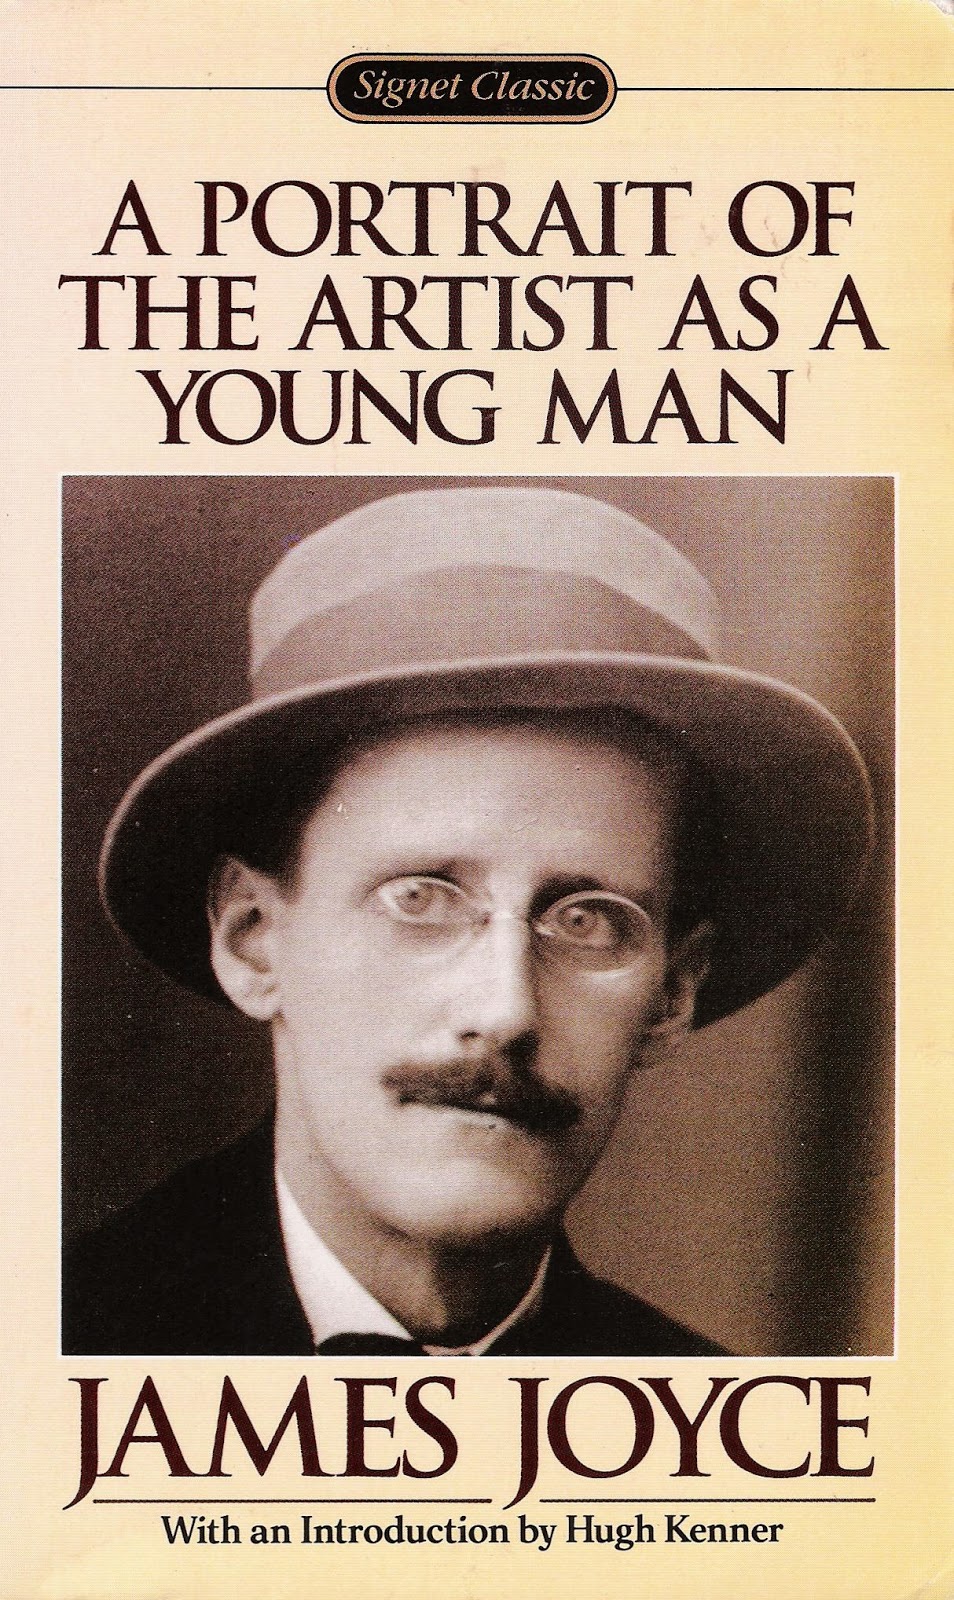 Joyce 1916 - A Portrait of the Artist as a Young Man